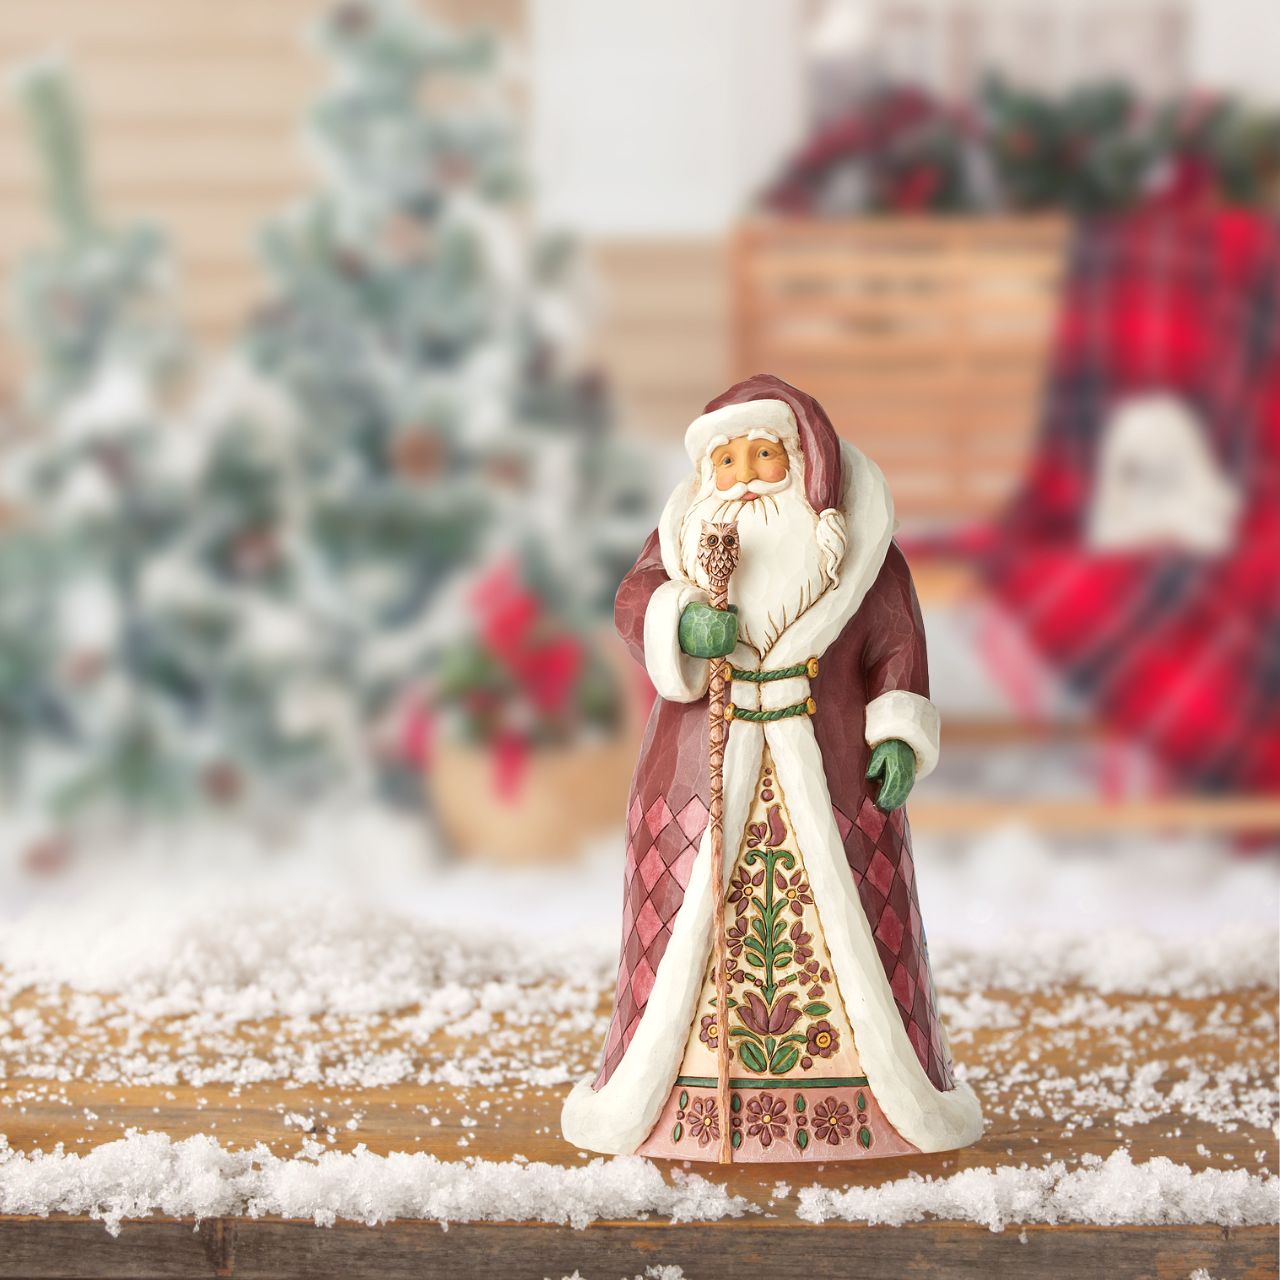 Jim Shore Heartwood Creek Quietly He Comes - Regal Santa  Handcrafted in incredible detail, this colourful Regal Santa with his Owl Cane features Jim Shore's signature combination of patterns inspired by quilting and authentic design drawn from the folk-art tradition known as Pennsylvania Dutch.